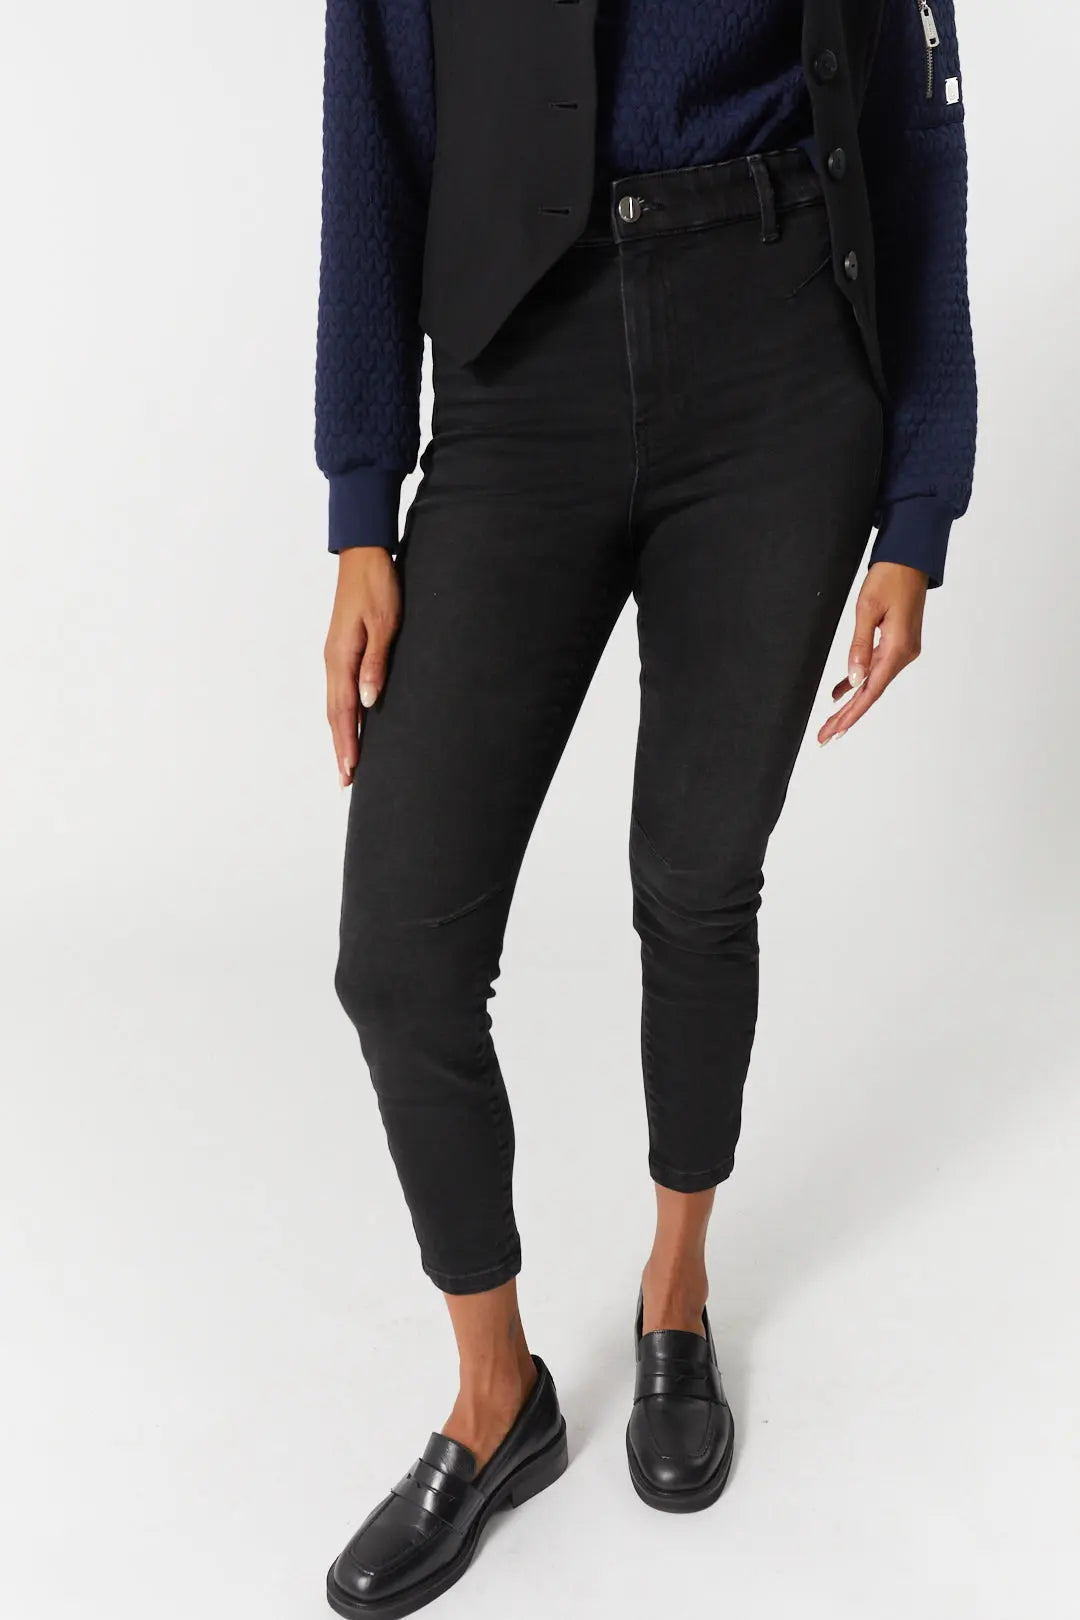 Jeans noir | Lively JOELLE Collection